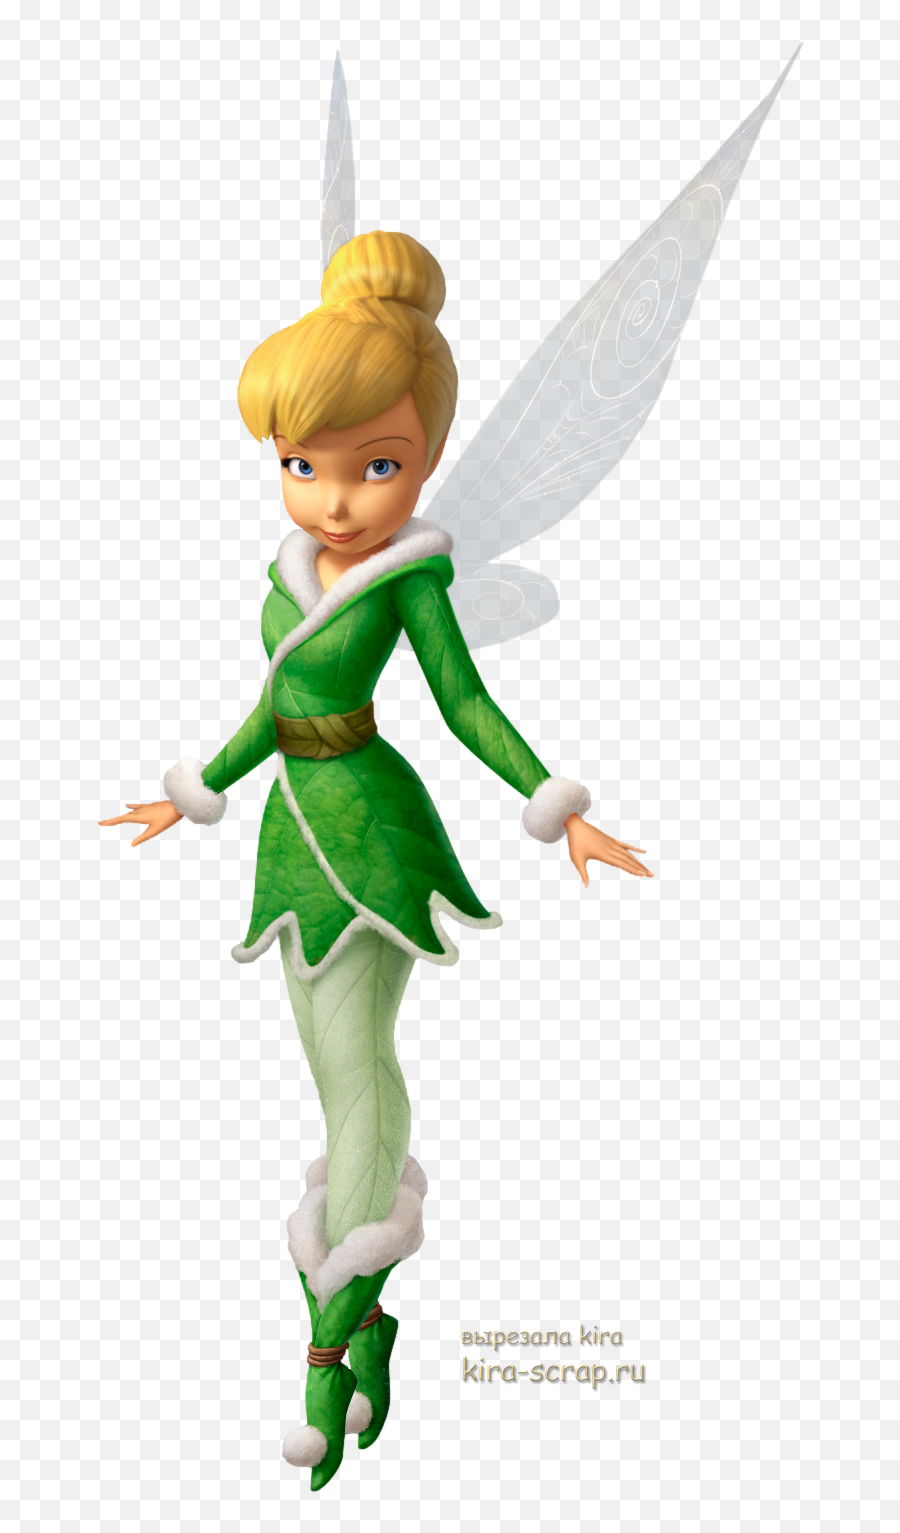 Pin By Erika Ponce On Tinkerbell Disney Disney Emoji,Tinkerbell Can Only Handle One Emotion